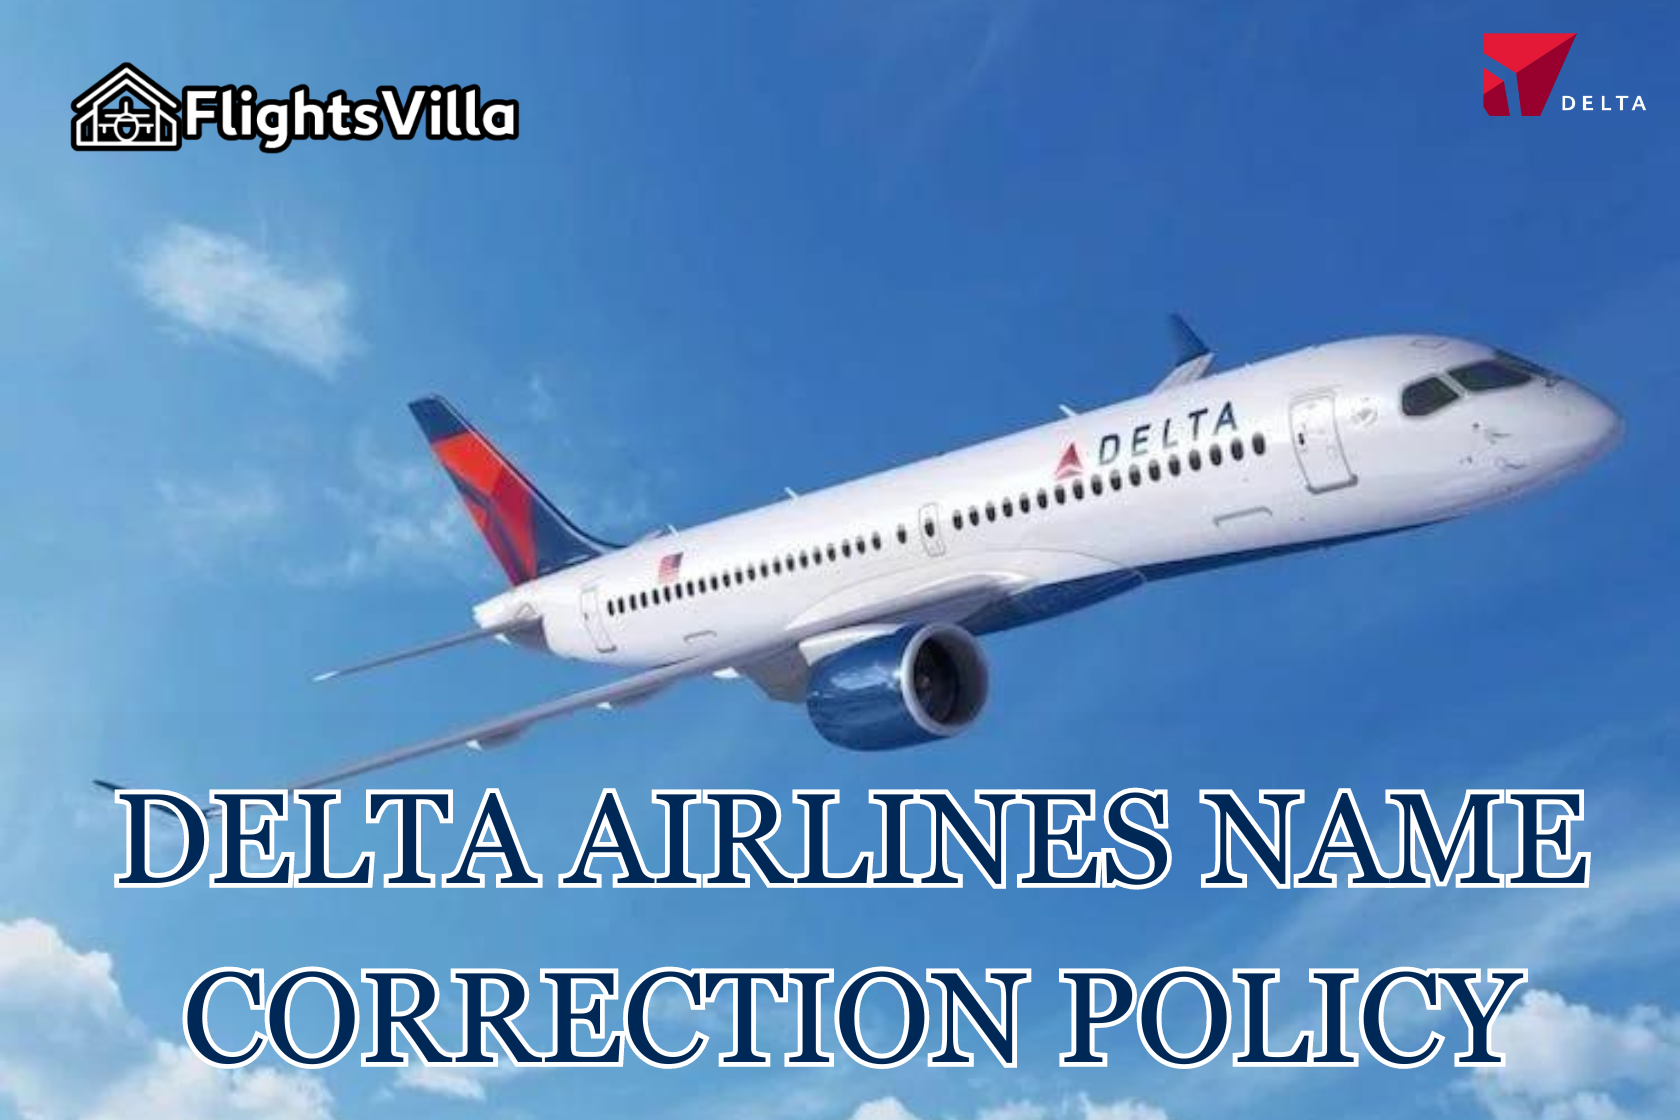 How to Change the Name on Delta Airlines ticket?